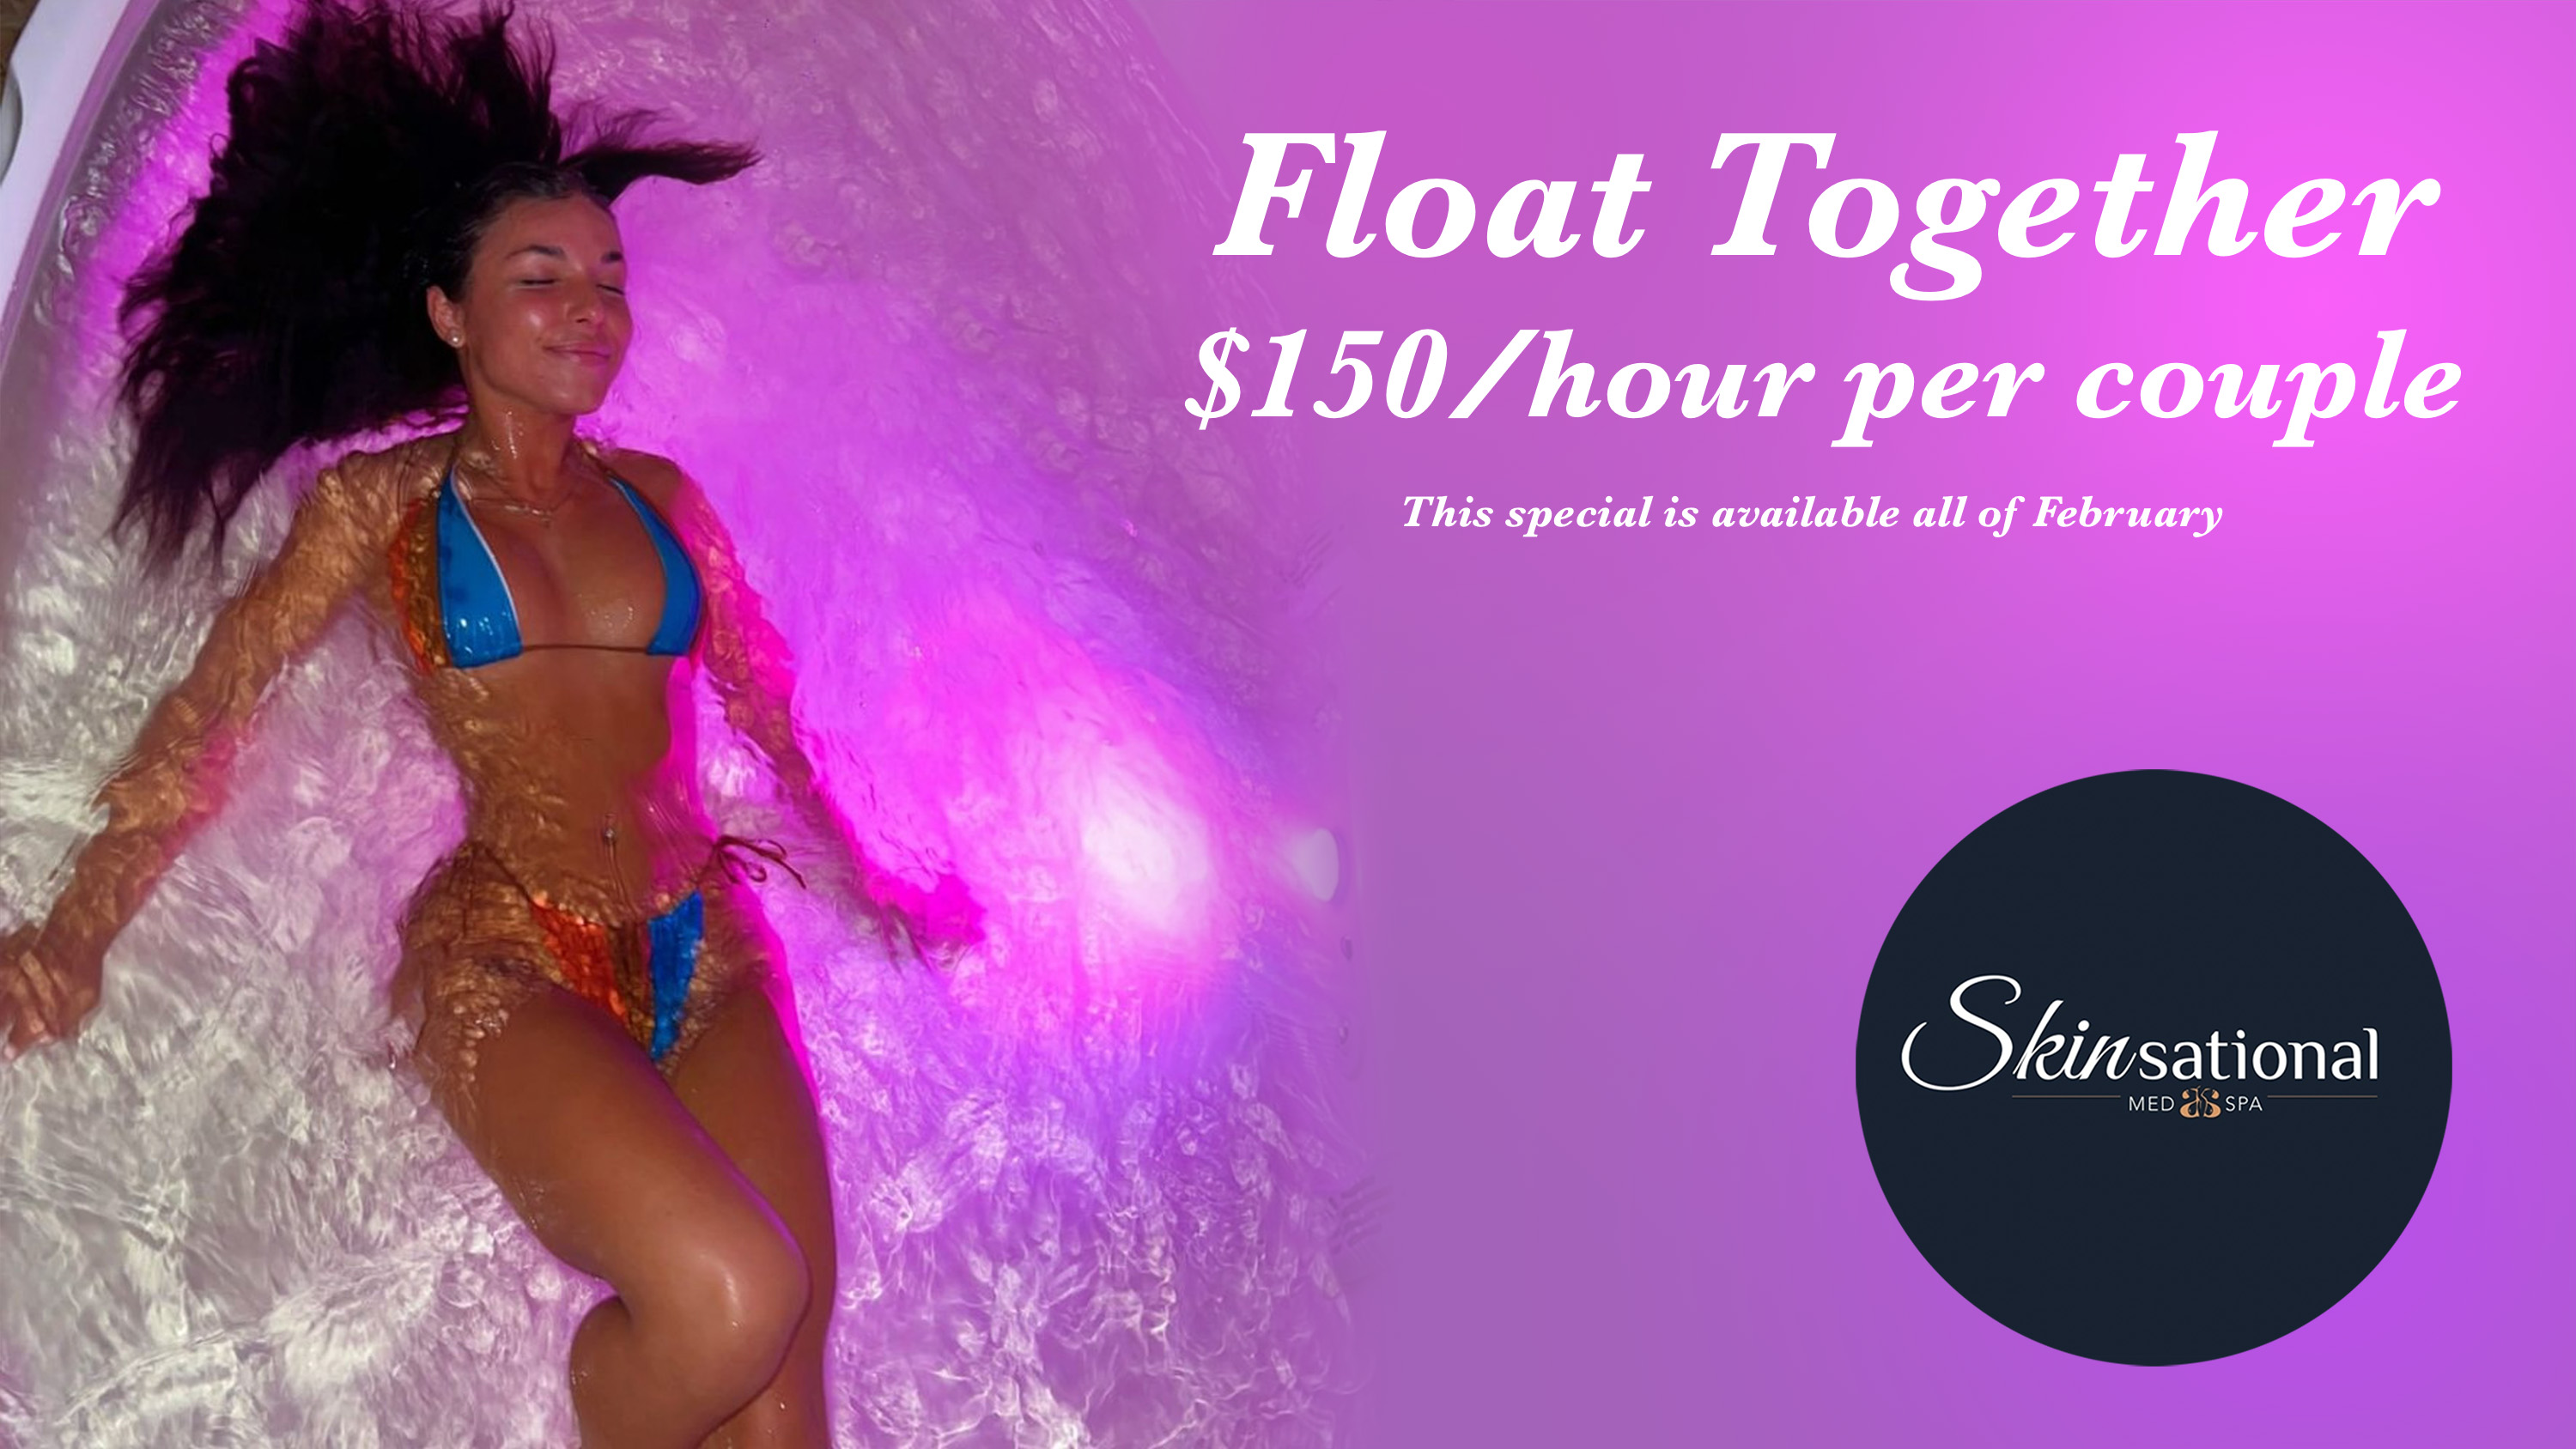 Float together - Valentine's special in Morgantown